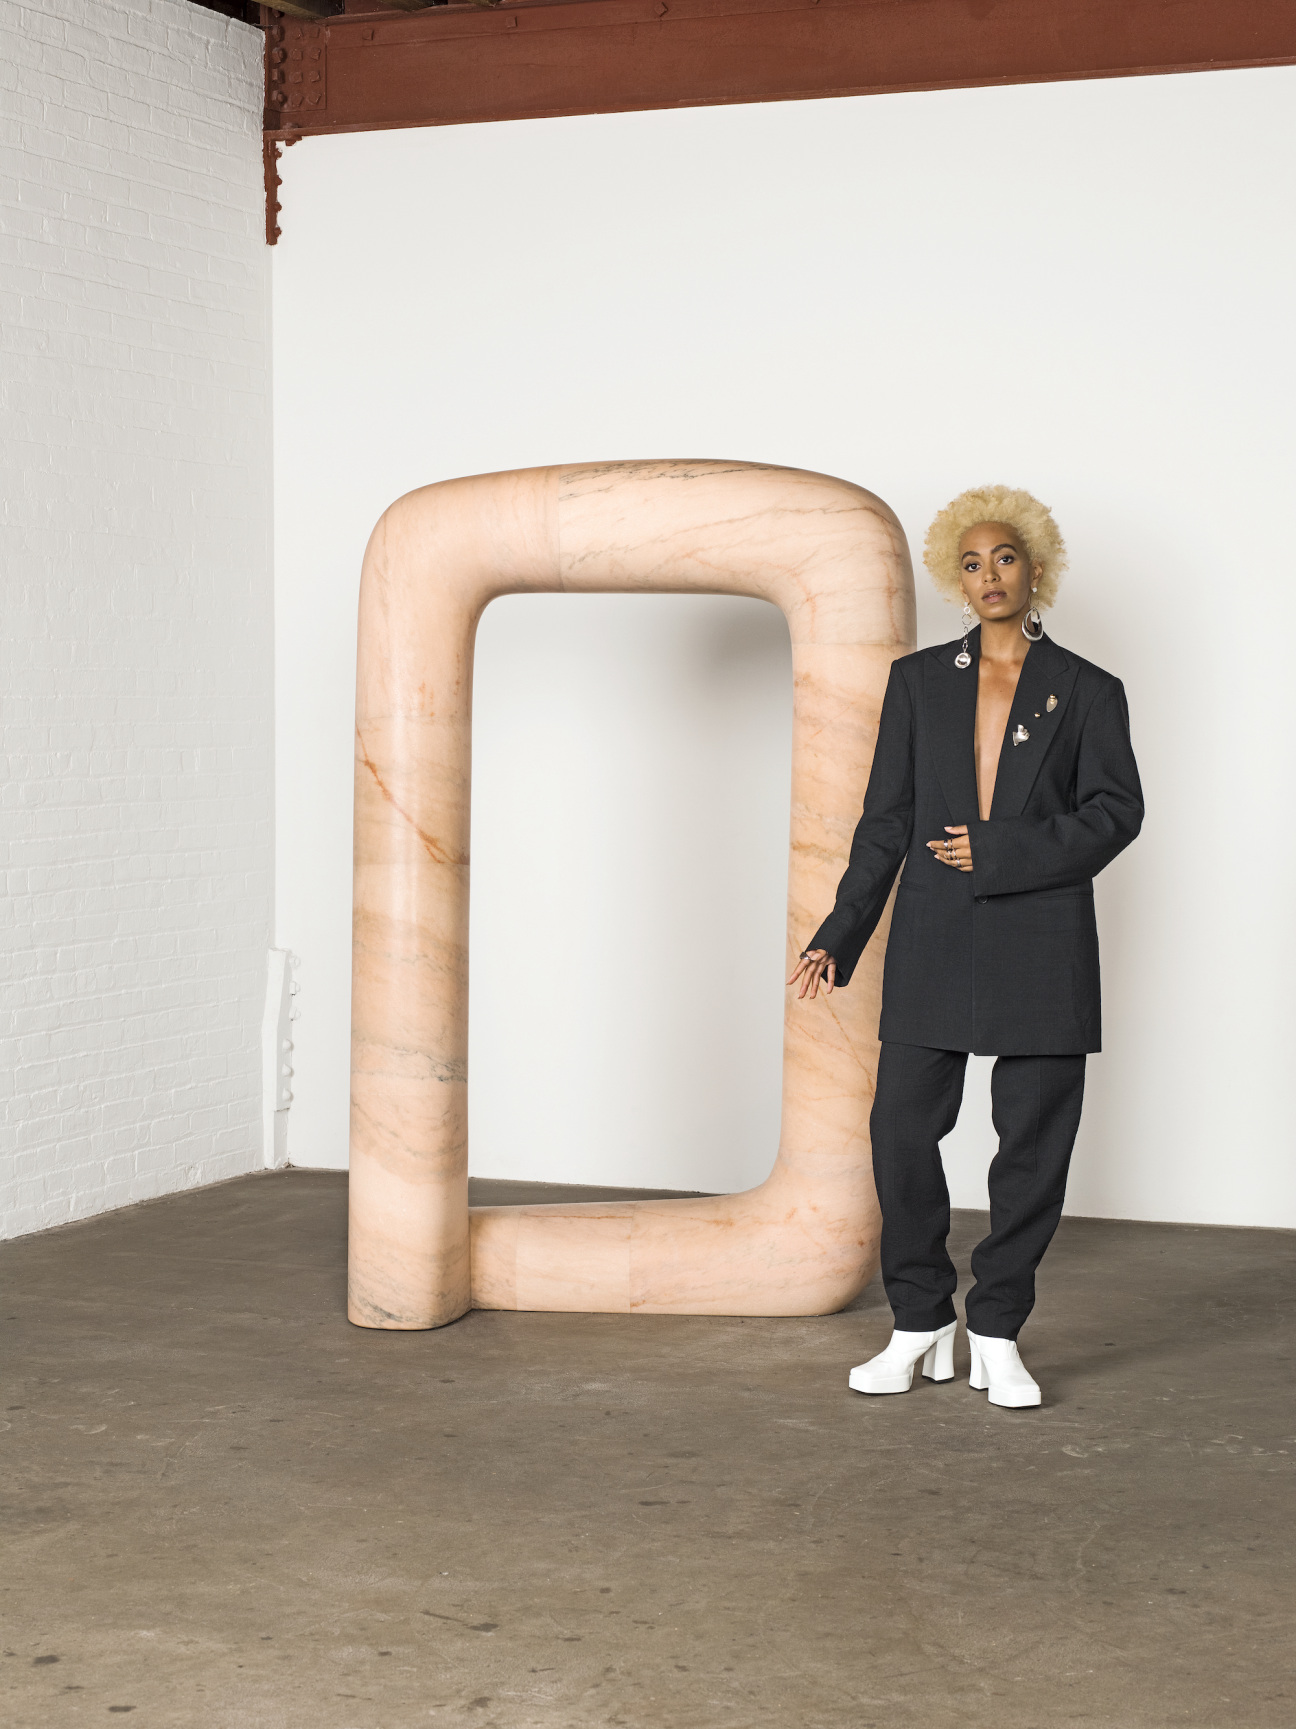 solange posing in oversized suit to the right of a square shaped sculpture